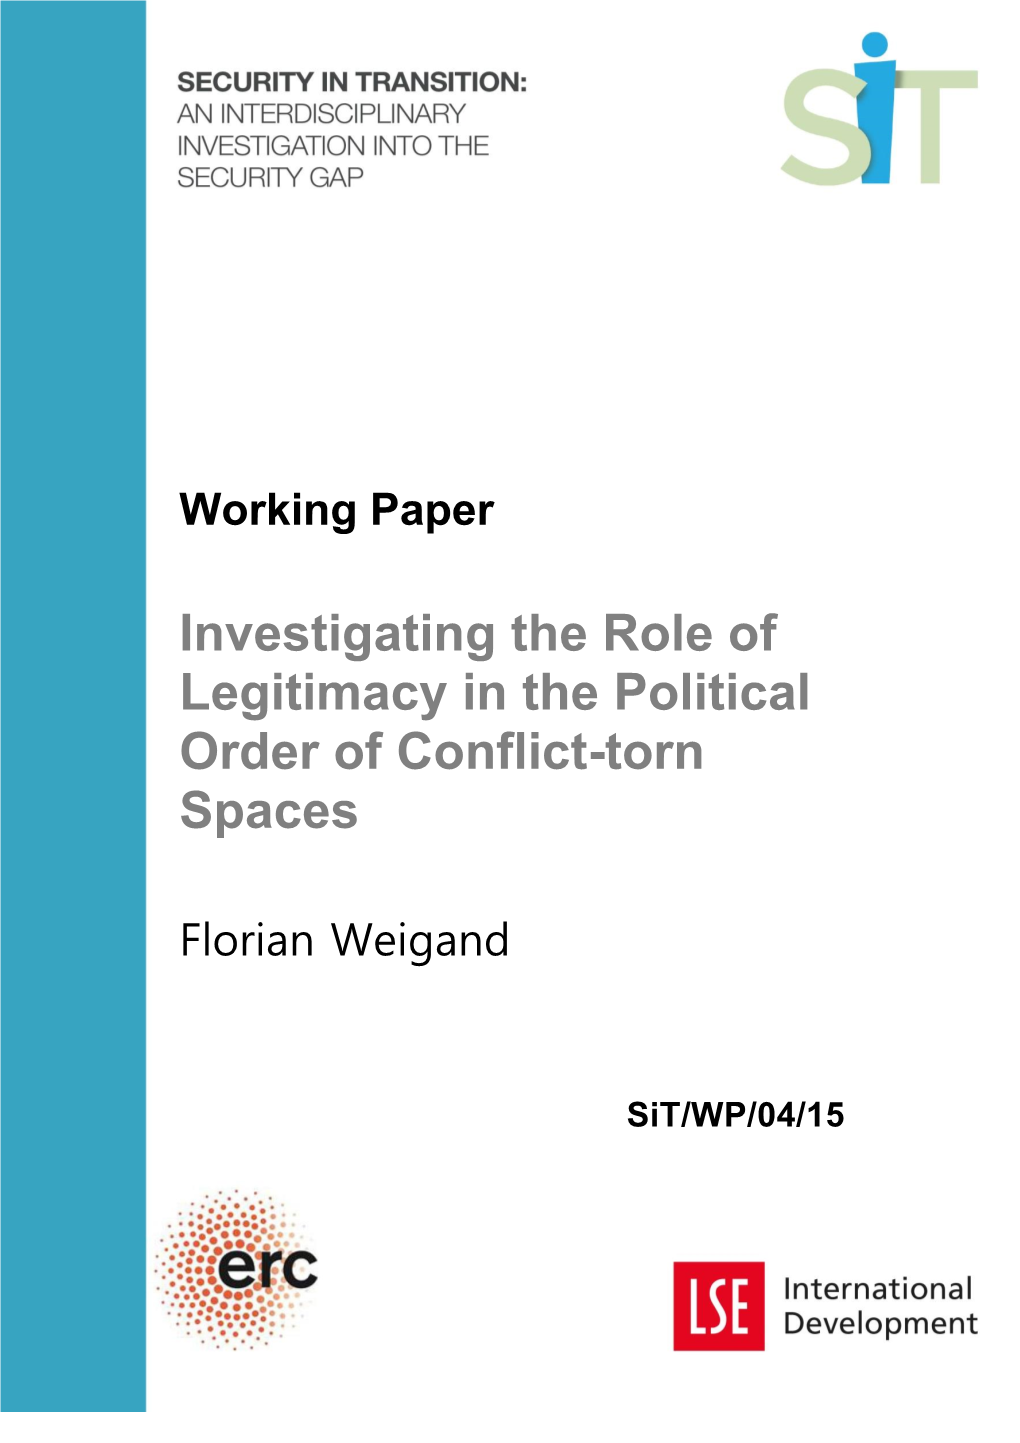 Investigating the Role of Legitimacy in the Political Order of Conflict-Torn Spaces